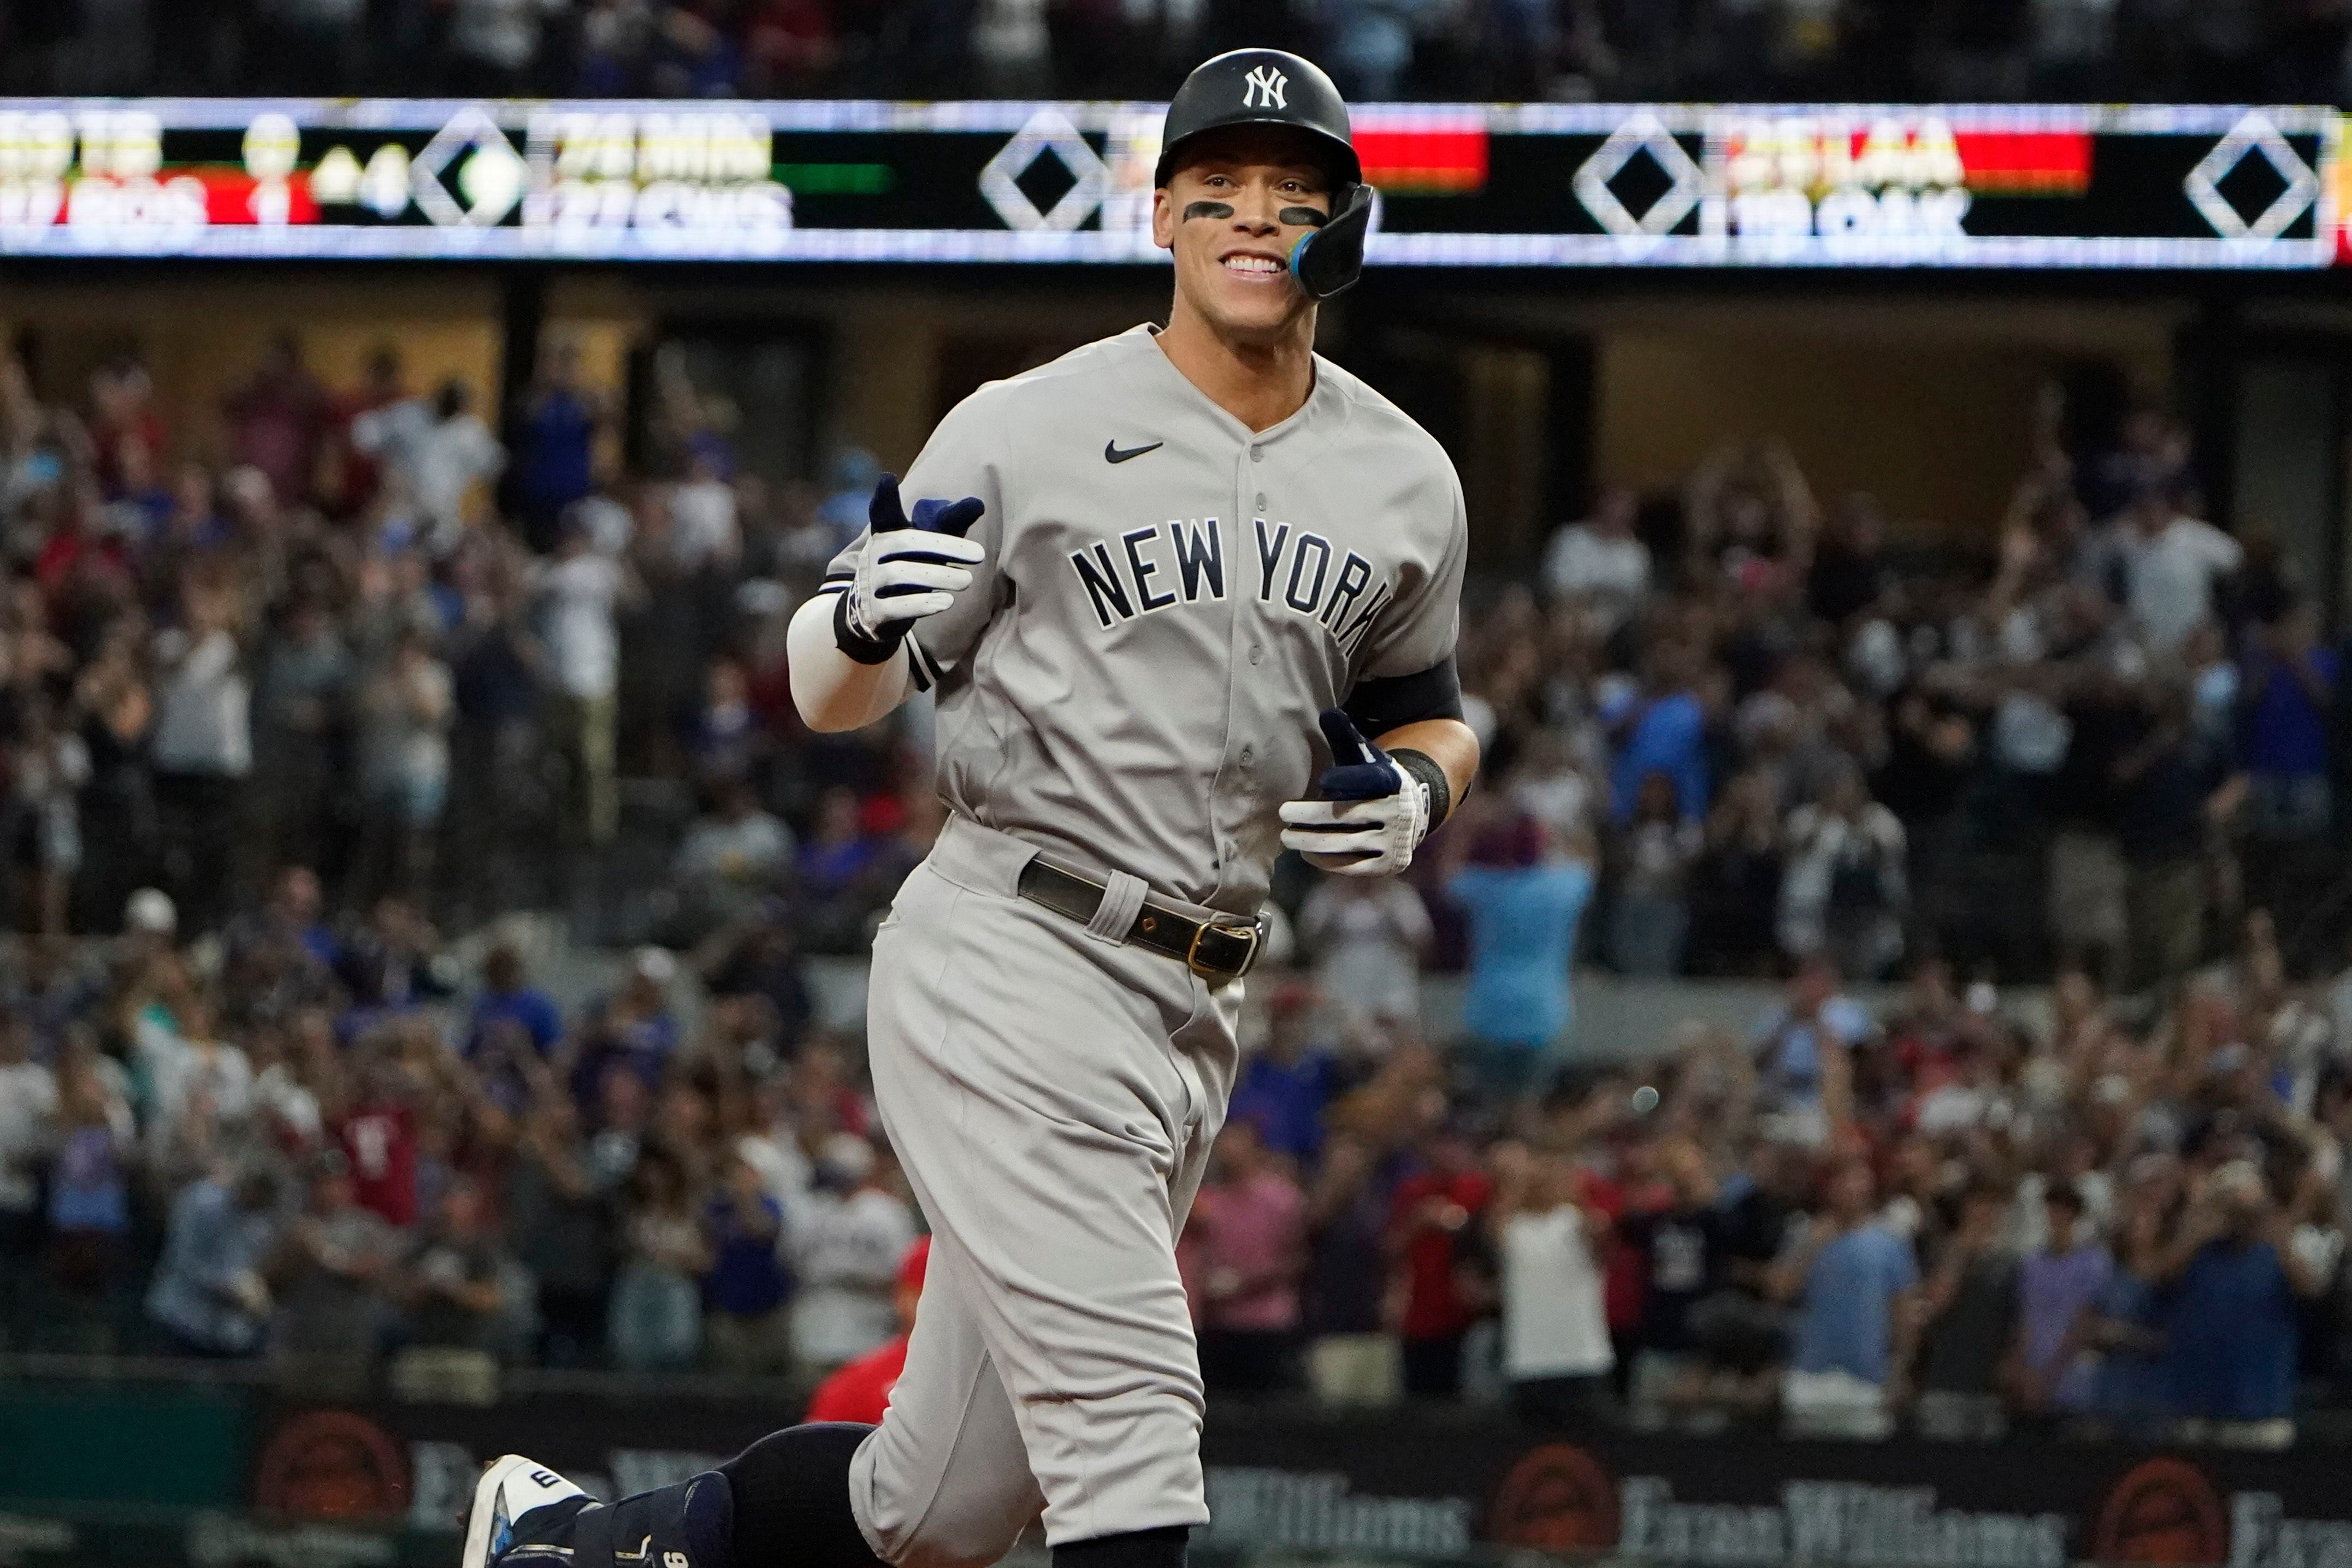 Yankees' Free Agent Aaron Judge To Meet With San Francisco Giants